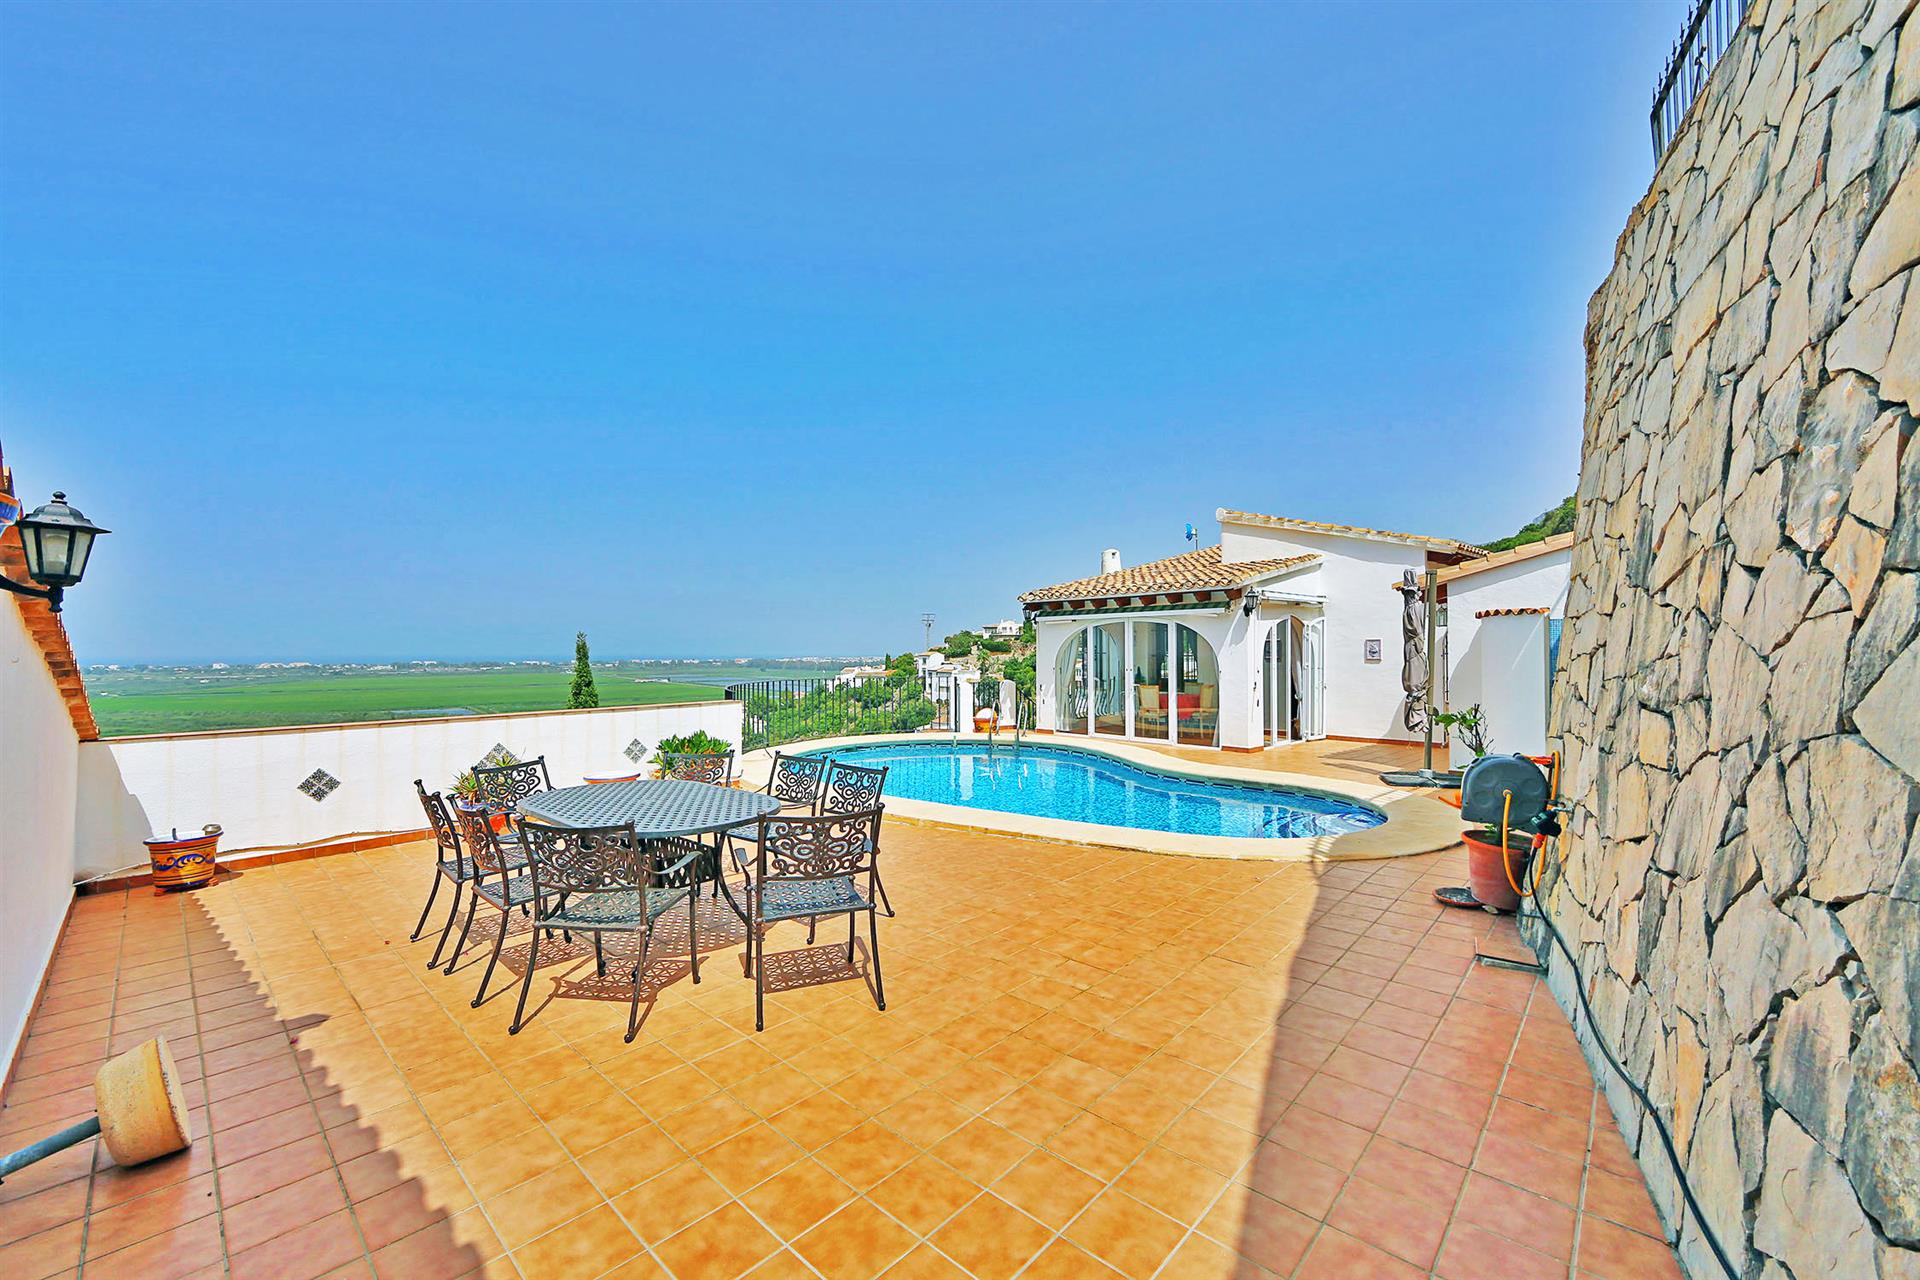 Villa with 3 separate apartments, pool and sea view in Monte Pego